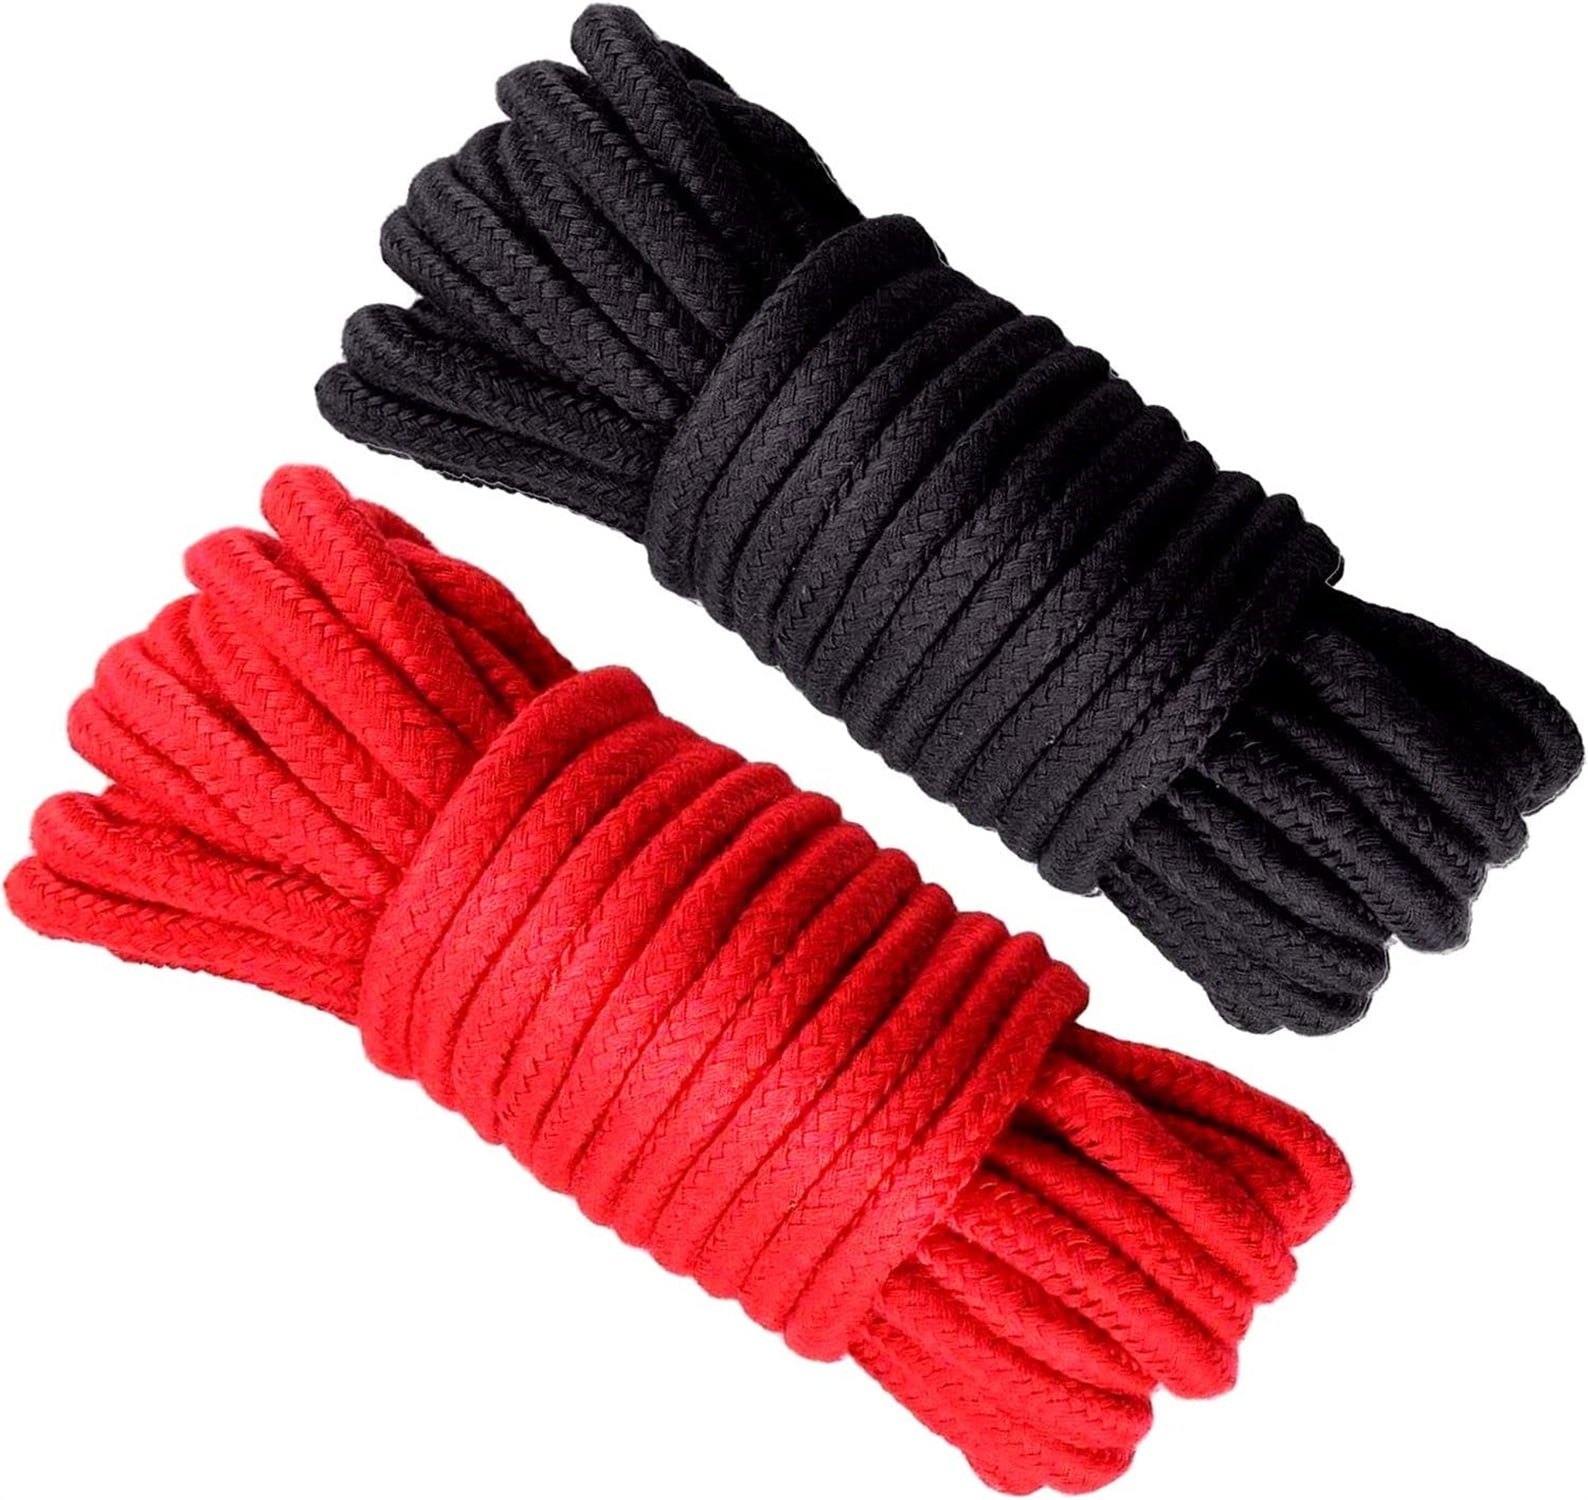 Liliantus Soft Cotton Rope 10M 32 Feet Soft Rope, 6mm Soft Twisted Cotton  Tying Rope (Red Black Red)